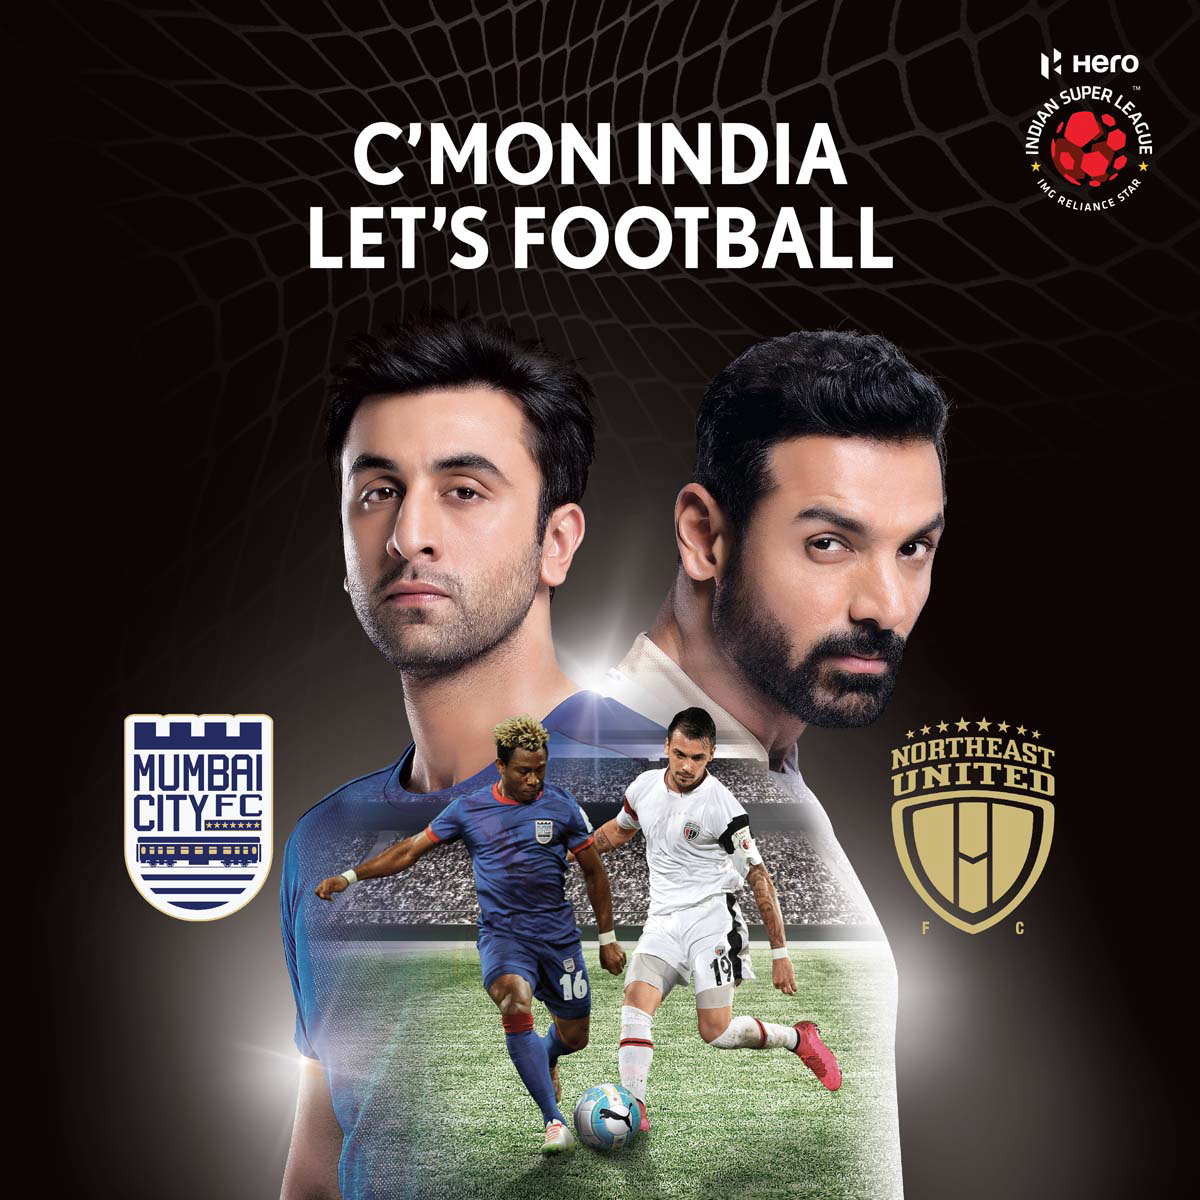 Indian Super League, Football League,Sport Photography, Crickerter Photoshoot, Shooting with Celebrity, Sport Photographer, Football, Sports, Passionate, Commissioned Photography, Best Advertising Photographer by Vikram Bawa, Mumbai, India